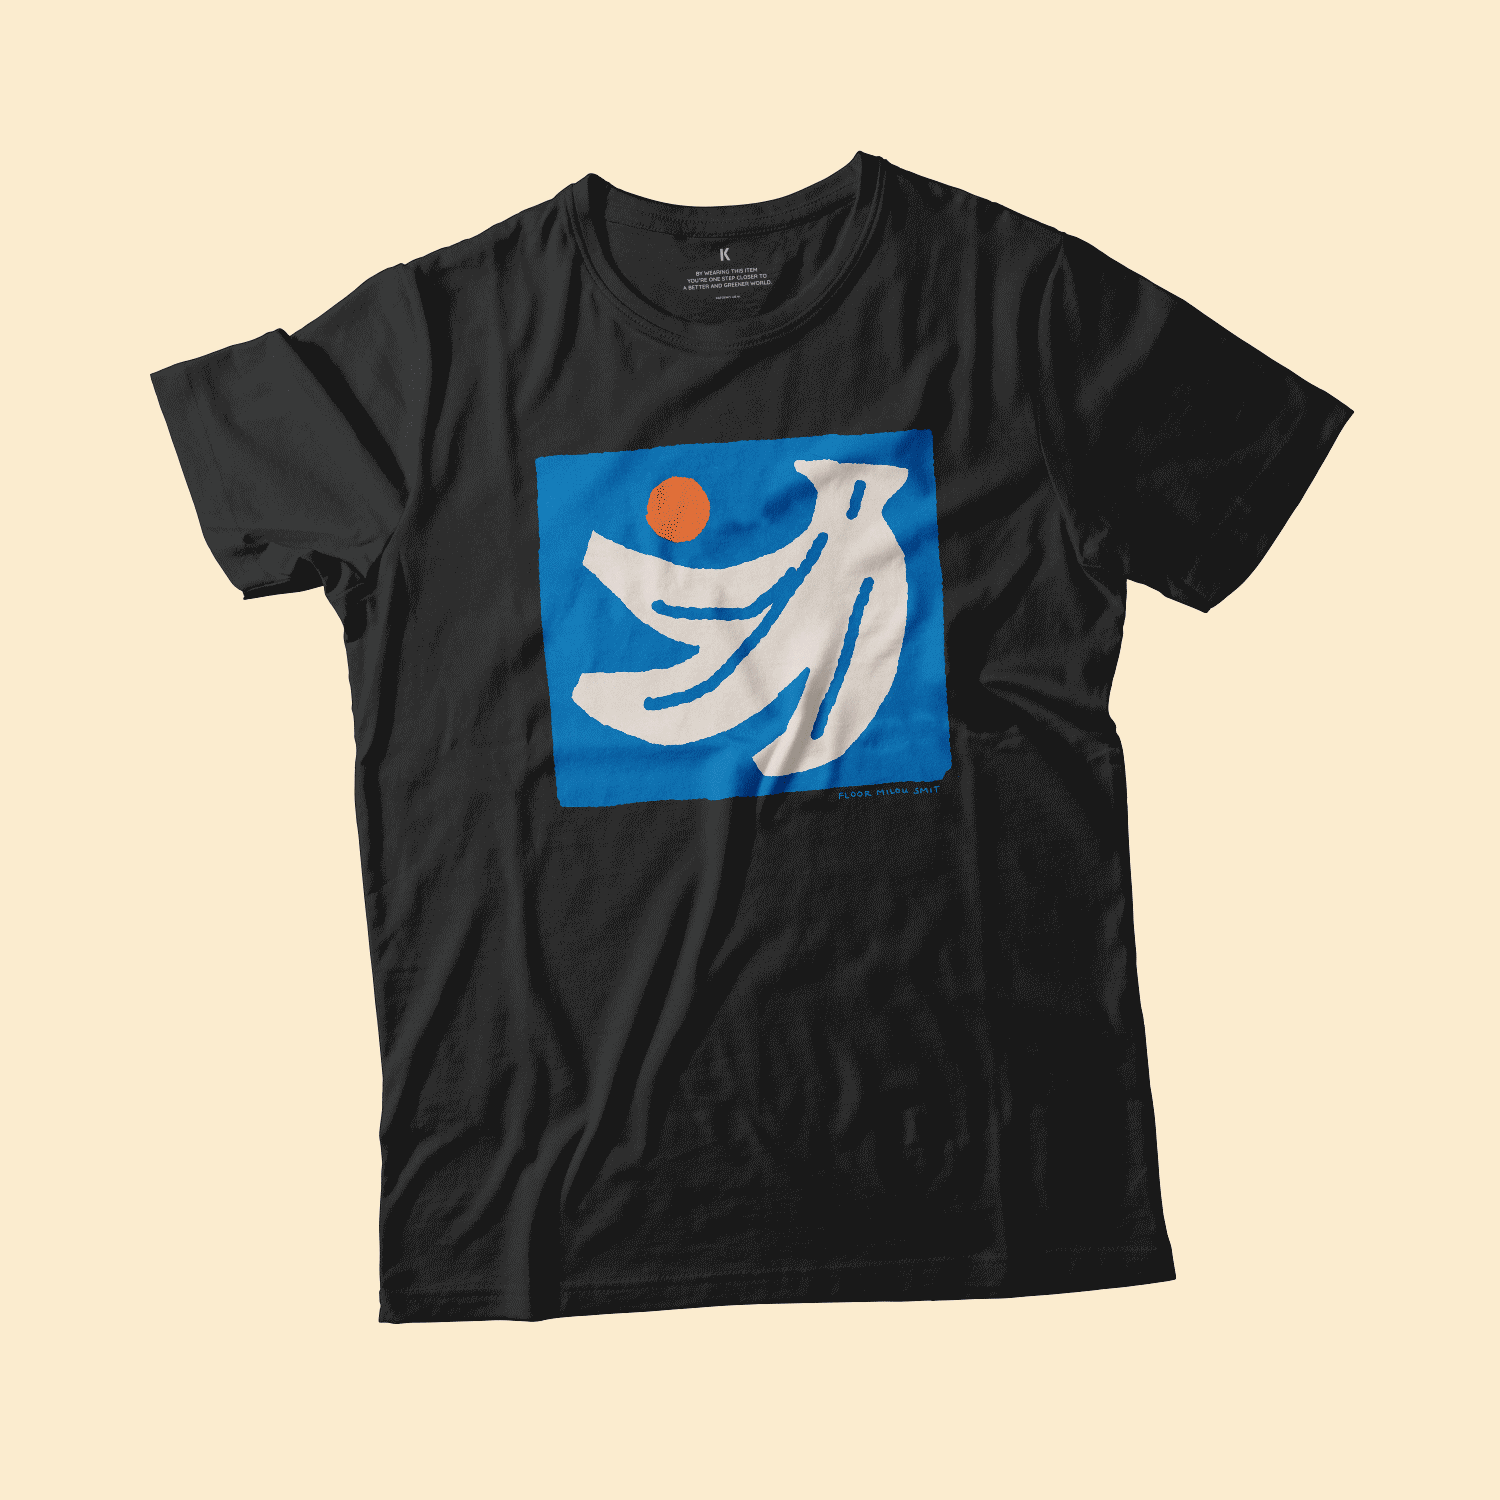 Gif of a black and heather grey t-shirt flat on cream background, looping. The print on the shirts are the same, an off-white hand of bananas with an orange circle next to them on a blue square background.